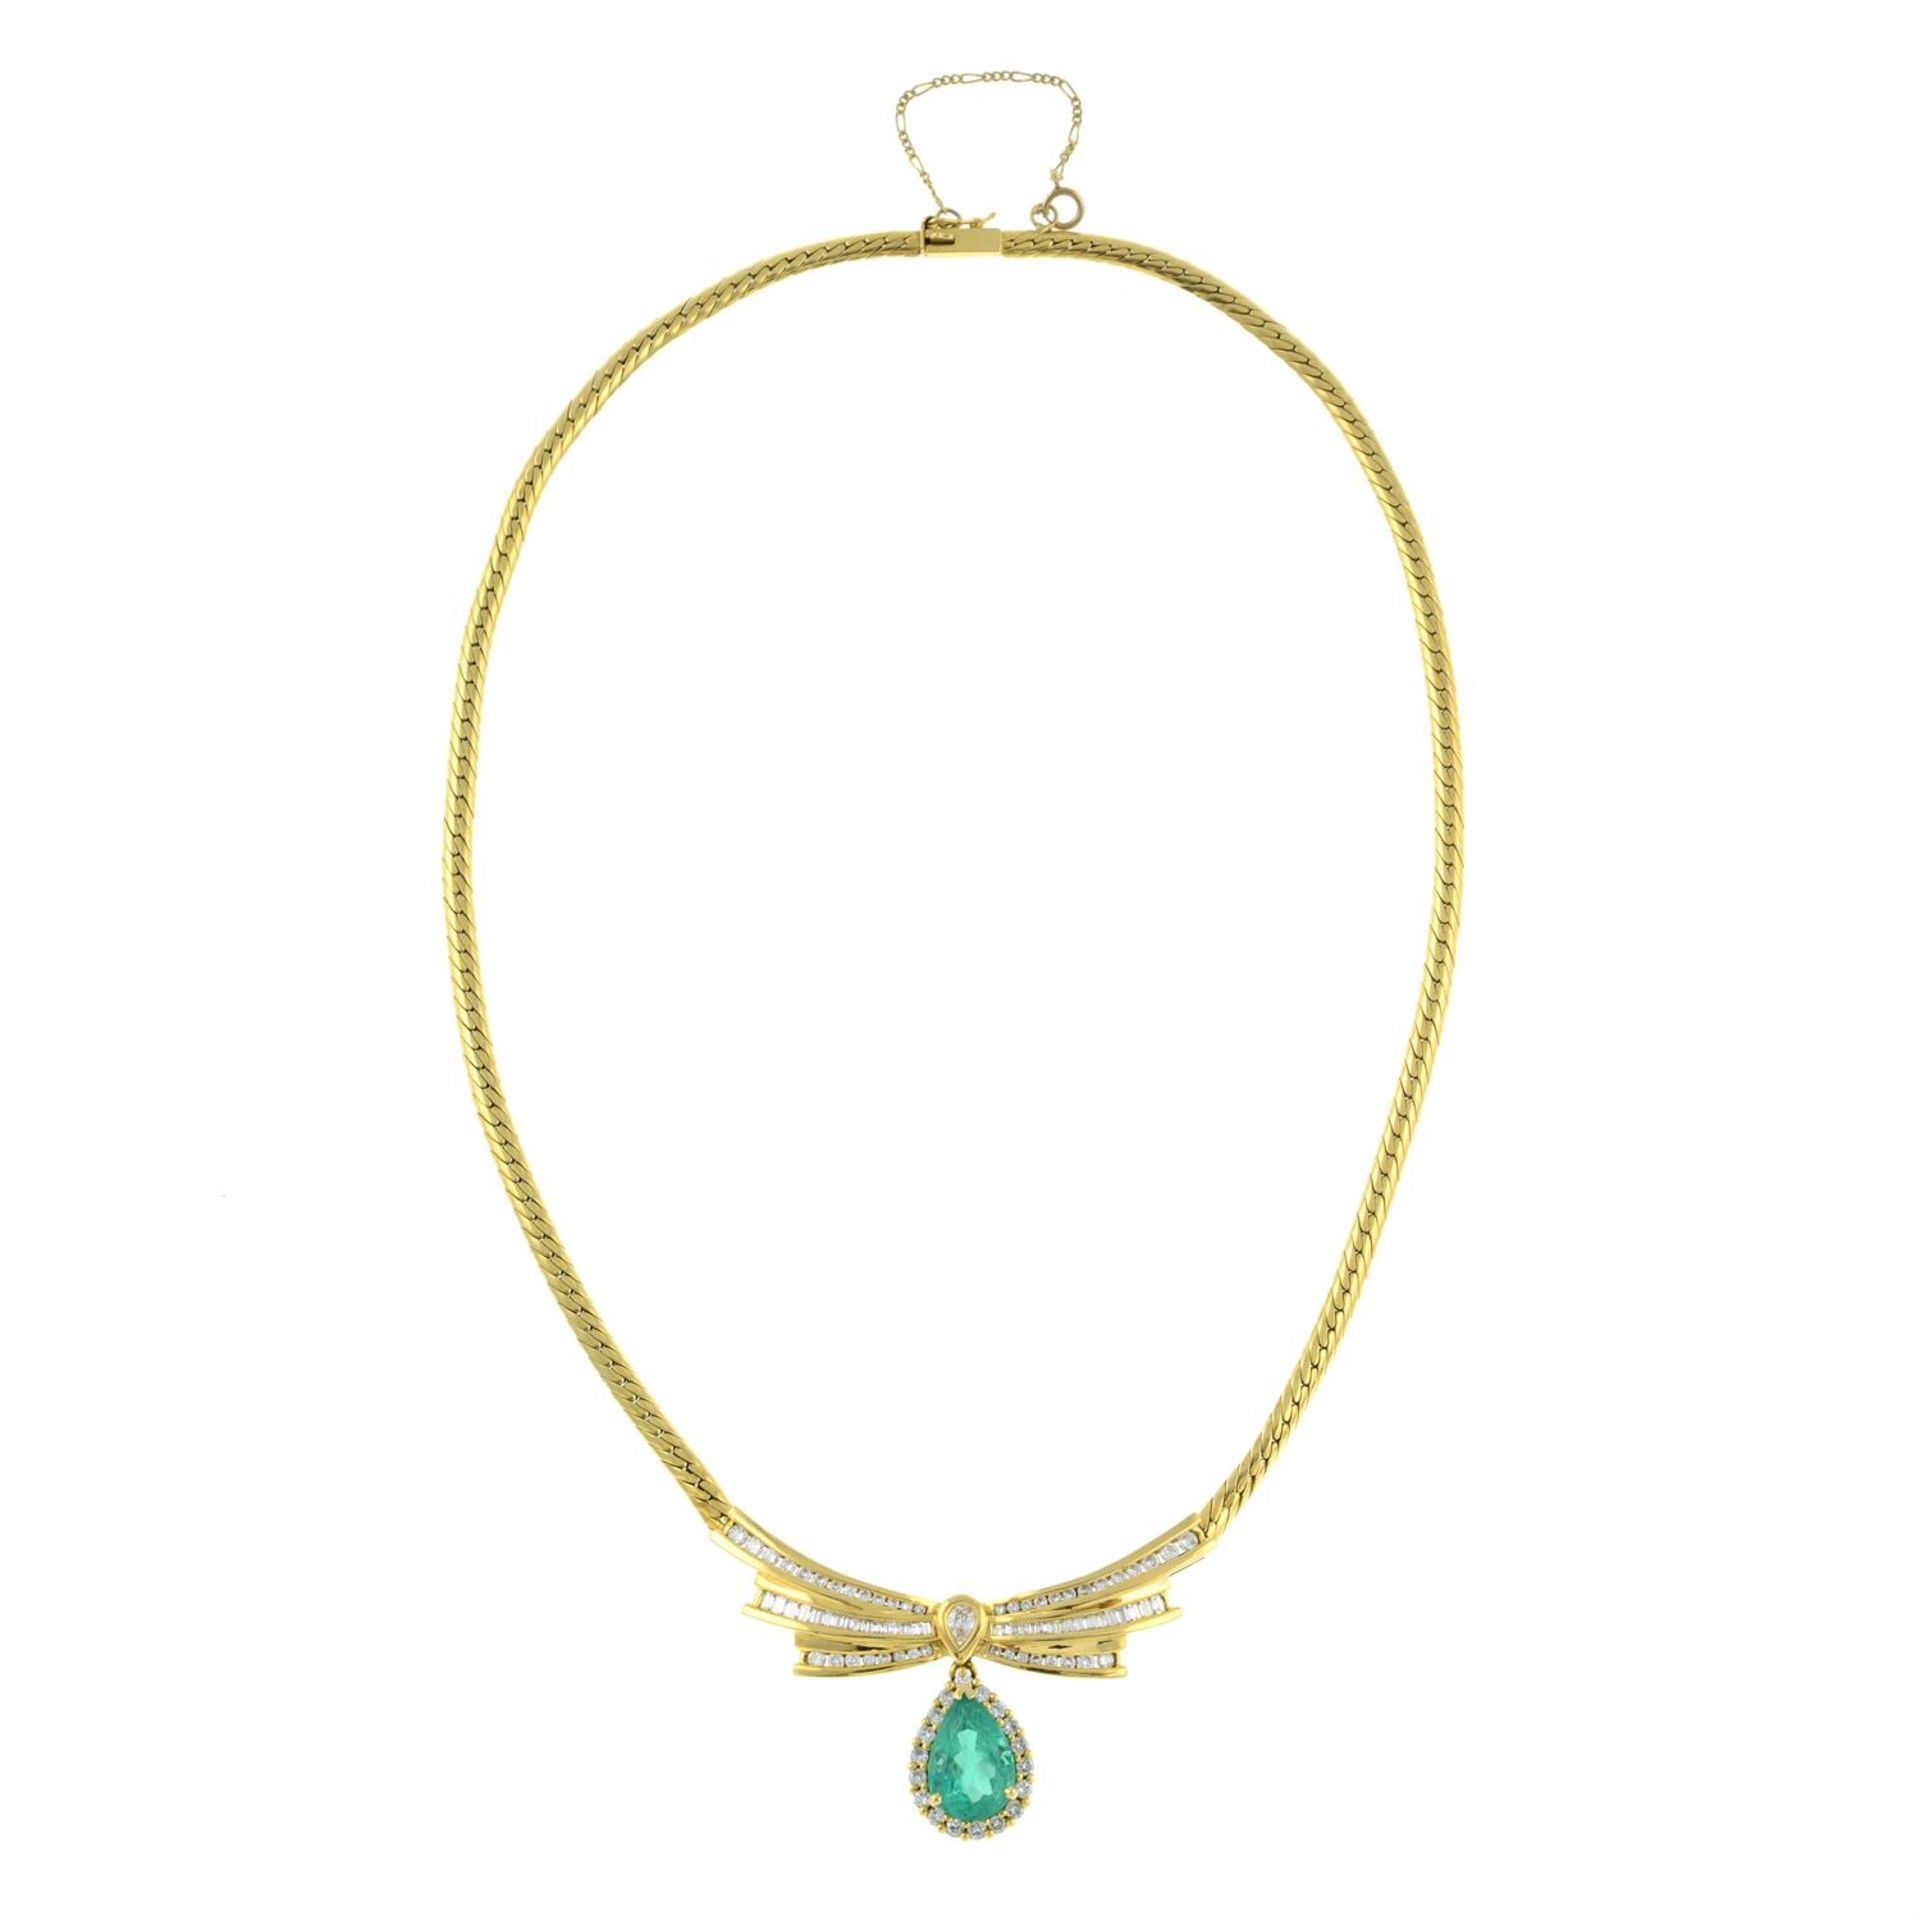 A Colombian emerald and vari-cut diamond necklace. - Image 2 of 6